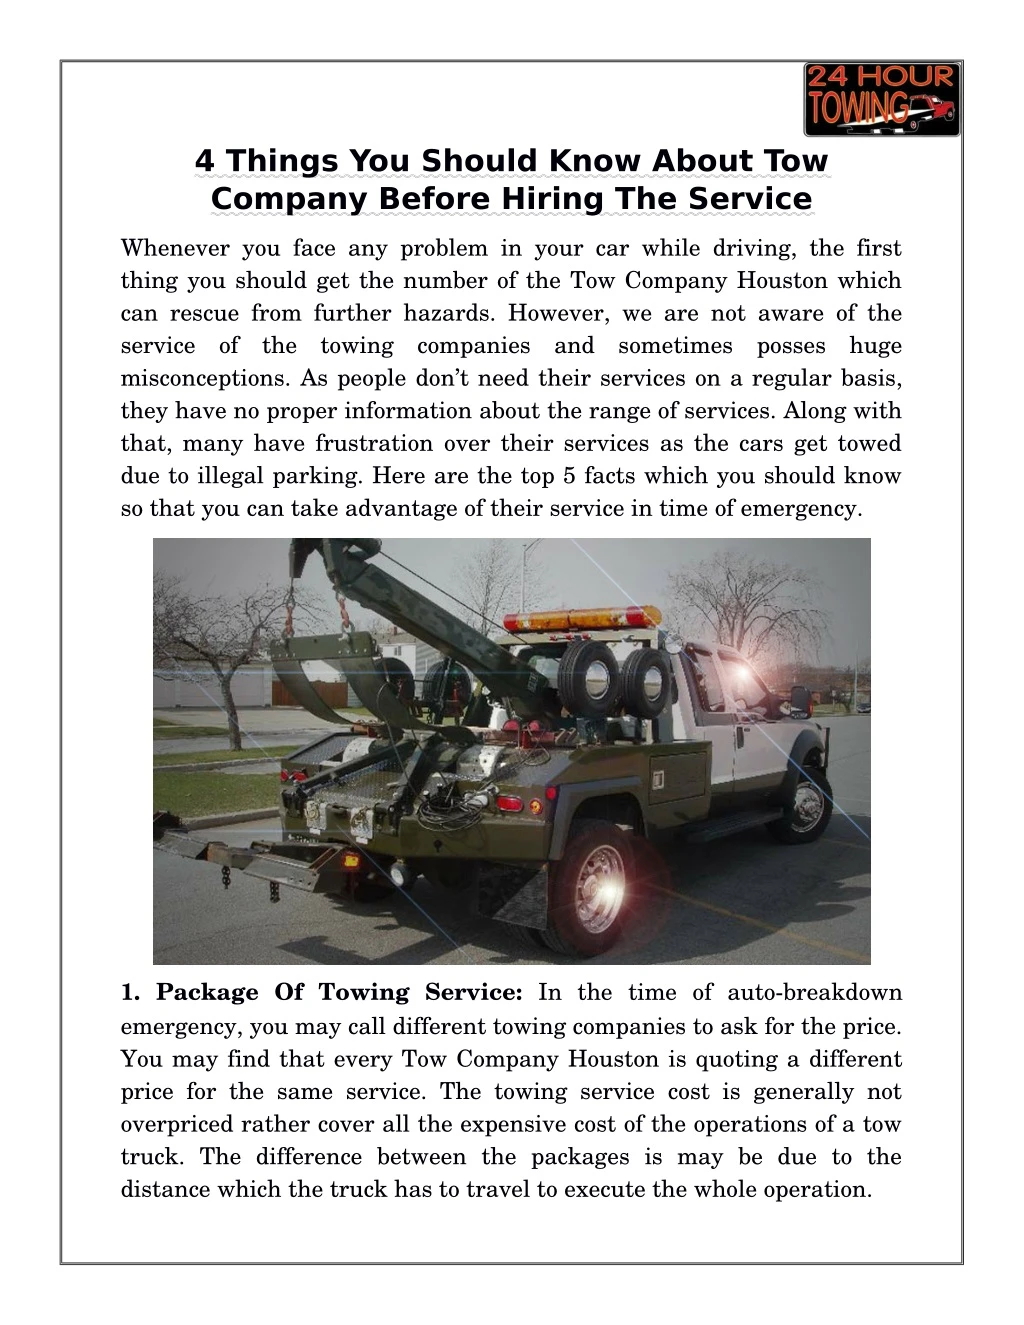 4 things you should know about tow company before